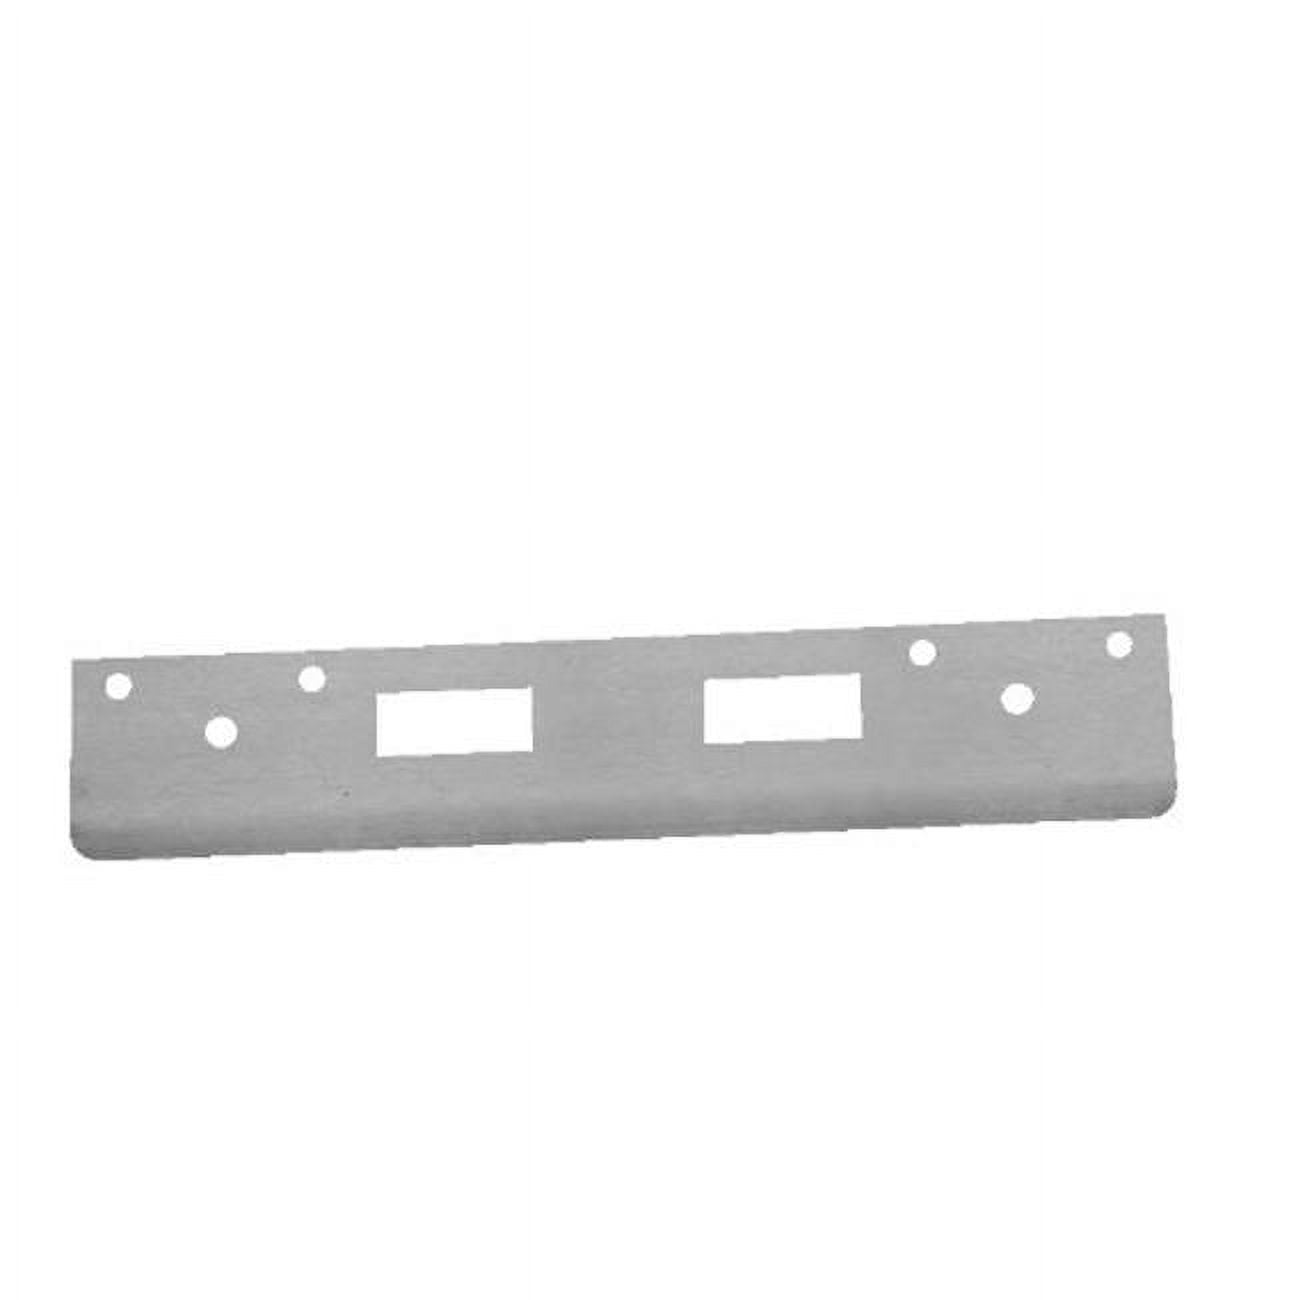 12 In. Full Lip High Security Strike With 6 In. Ctc Latch Holes, Silver Coated